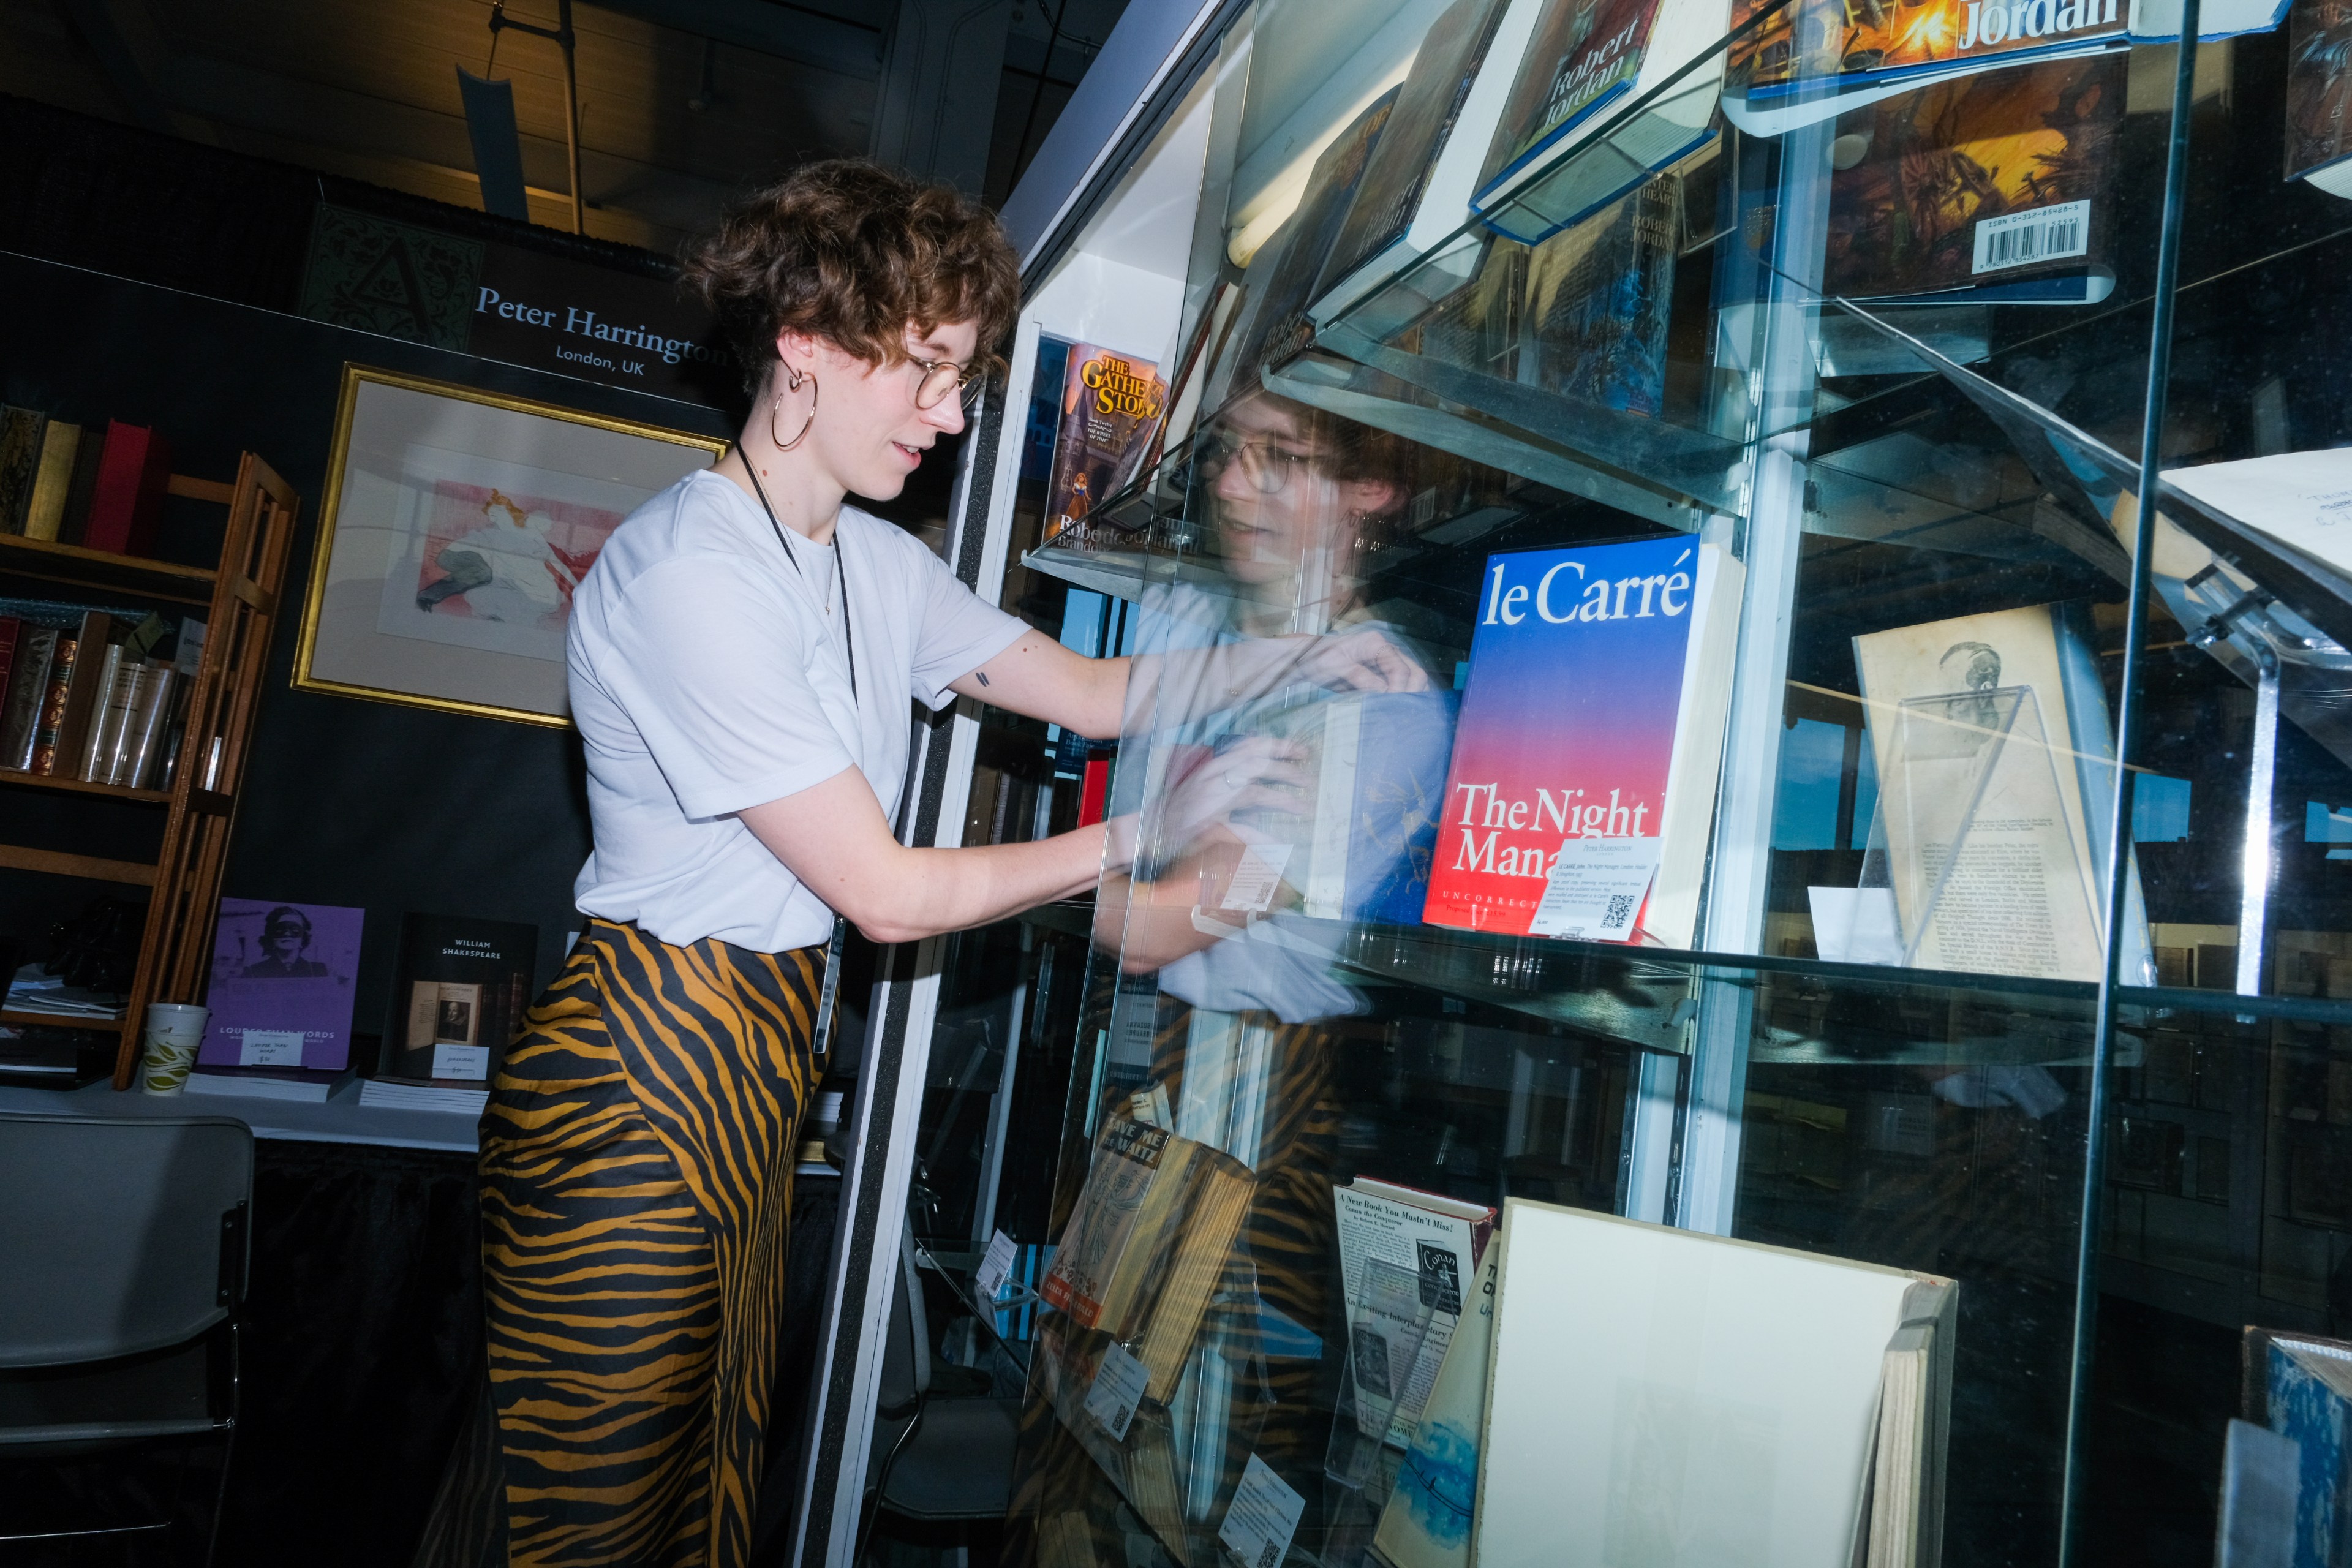 A person in a white shirt and striped pants is arranging books inside a glass display case in a well-lit room.